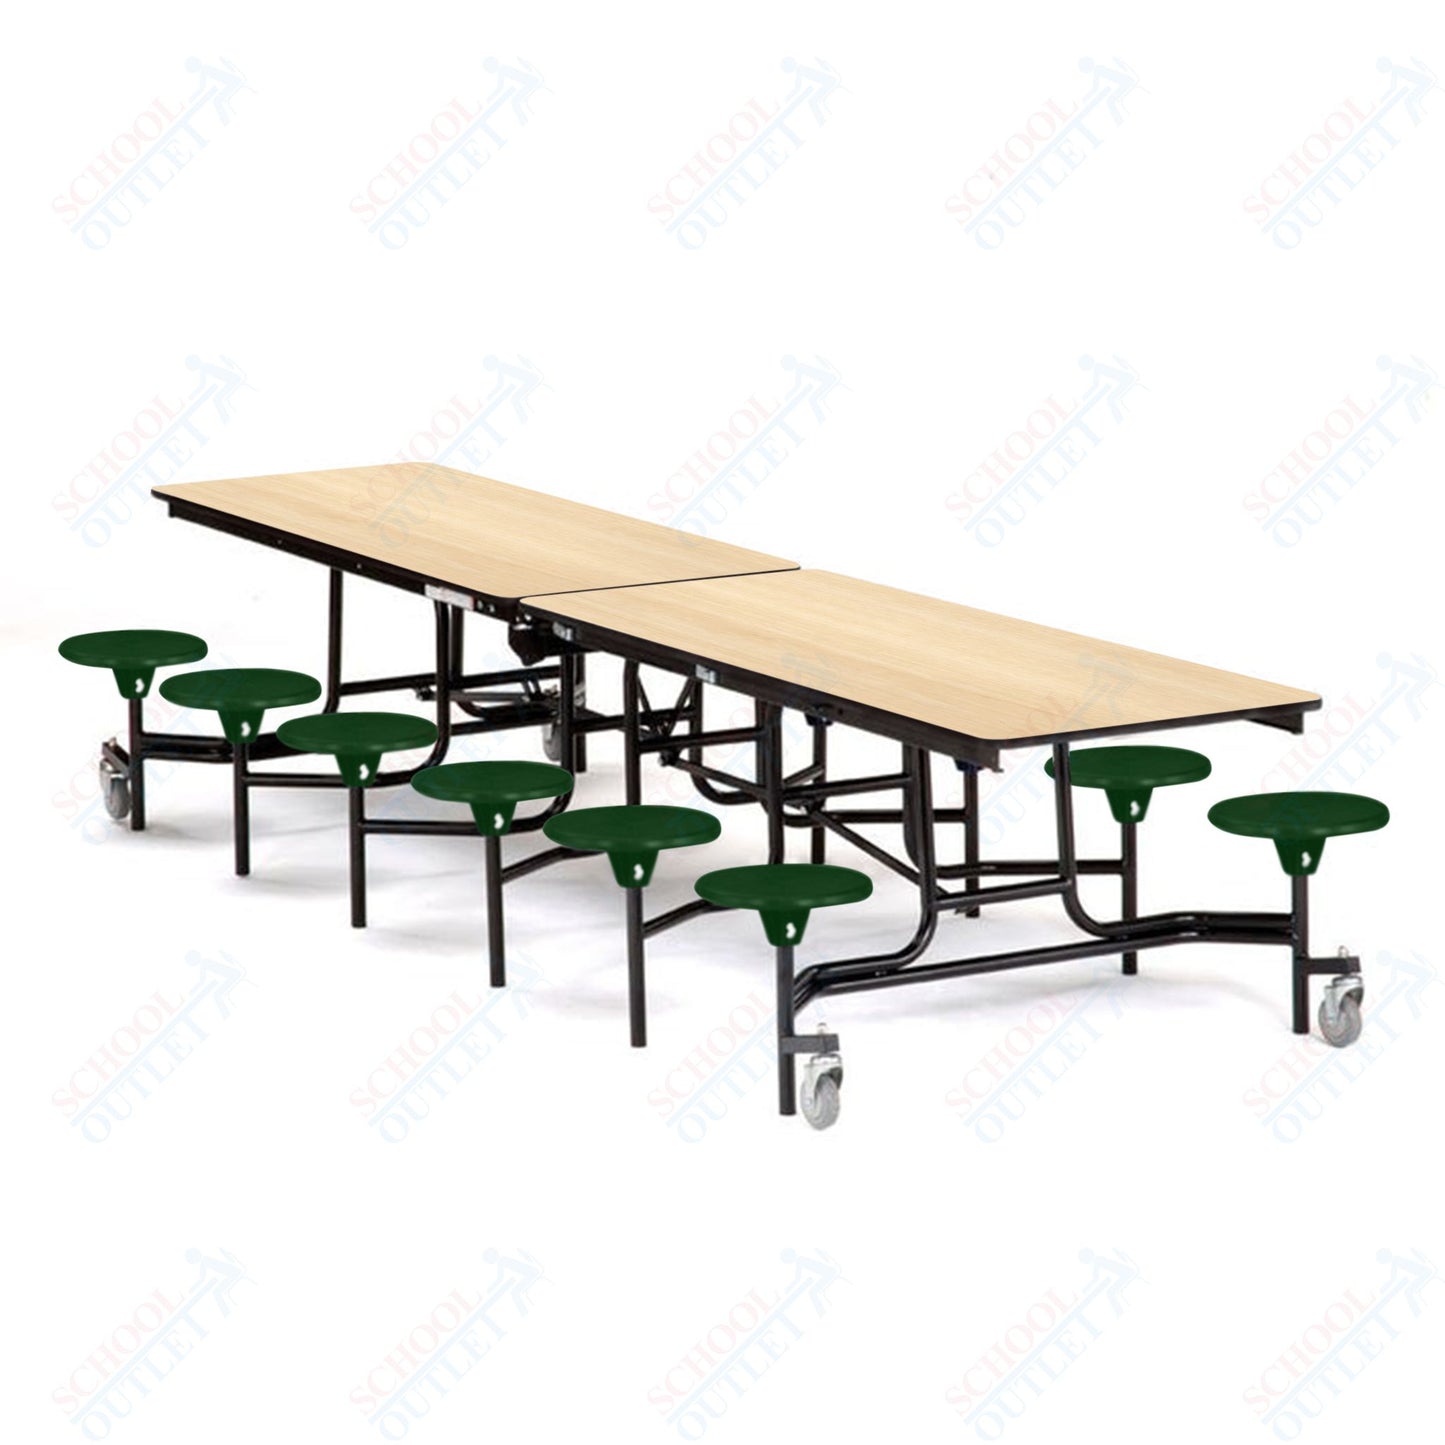 Mobile Cafeteria Lunchroom Stool Table - 30" W x 12' L - 12 Stools - Particleboard Core - T-Molding Edge - Black Powdercoated Frame